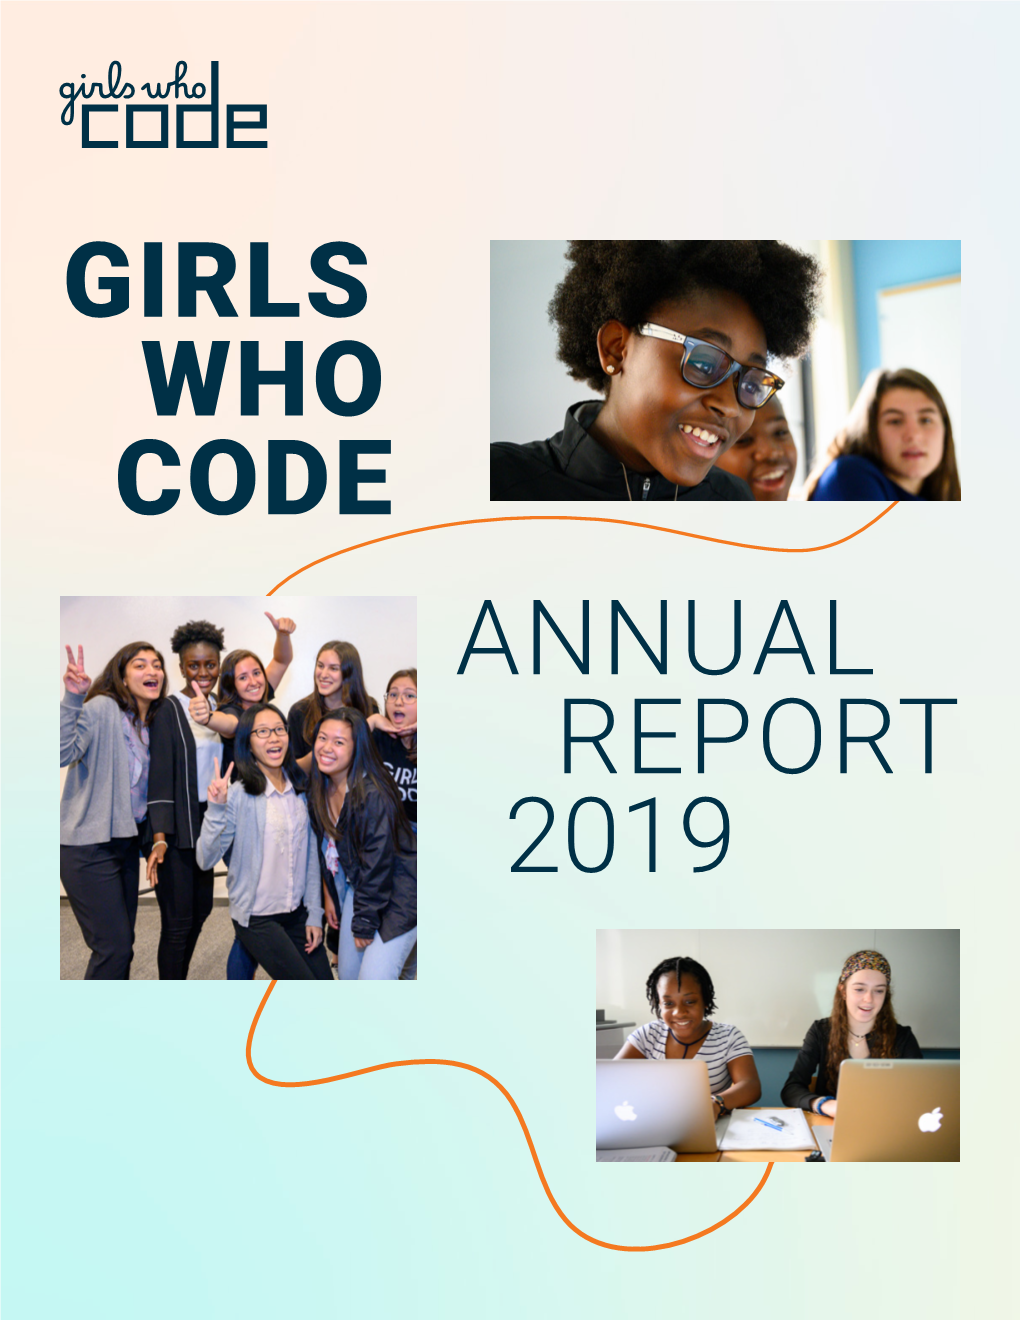 Girls Who Code Annual Report 2019 Letter from Founder and Ceo Reshma Saujani